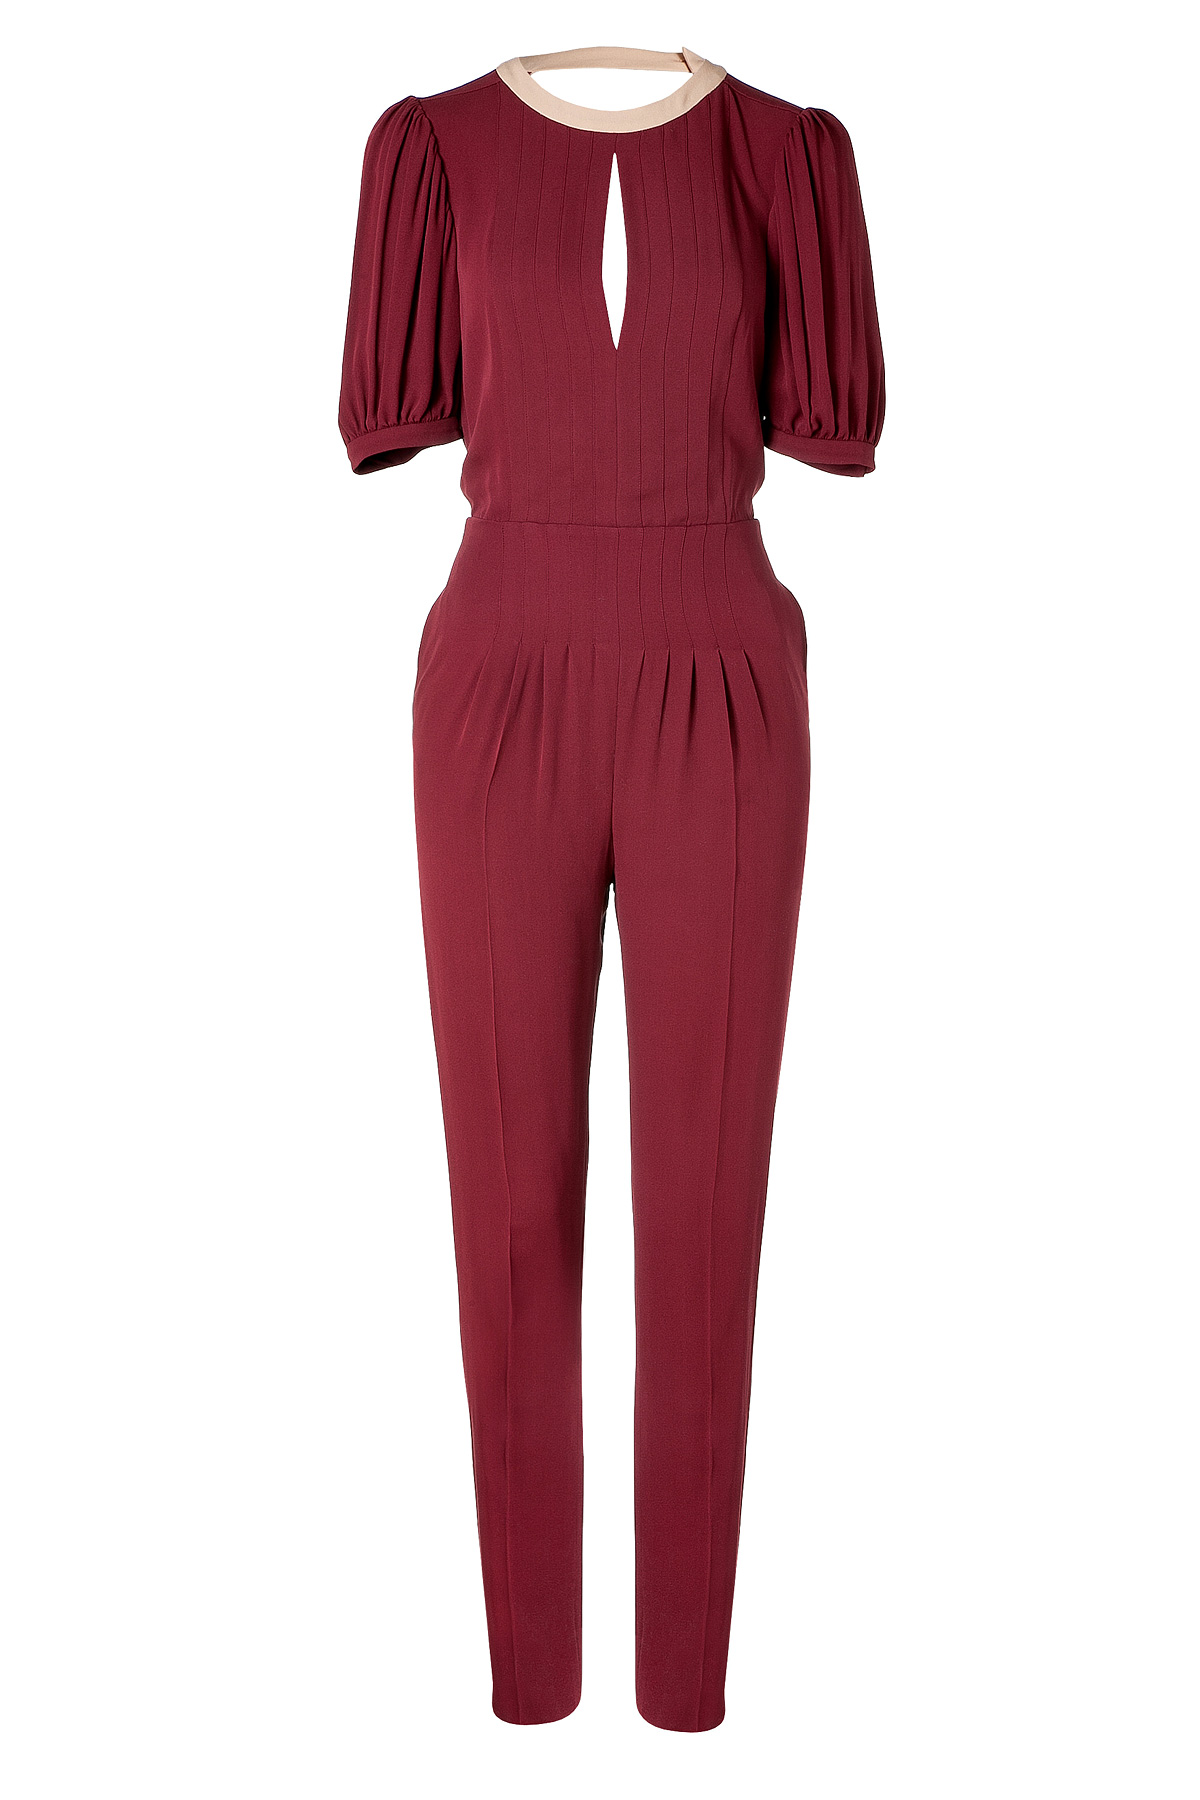 Lyst - Valentino Barolo Silk Jumpsuit in Red